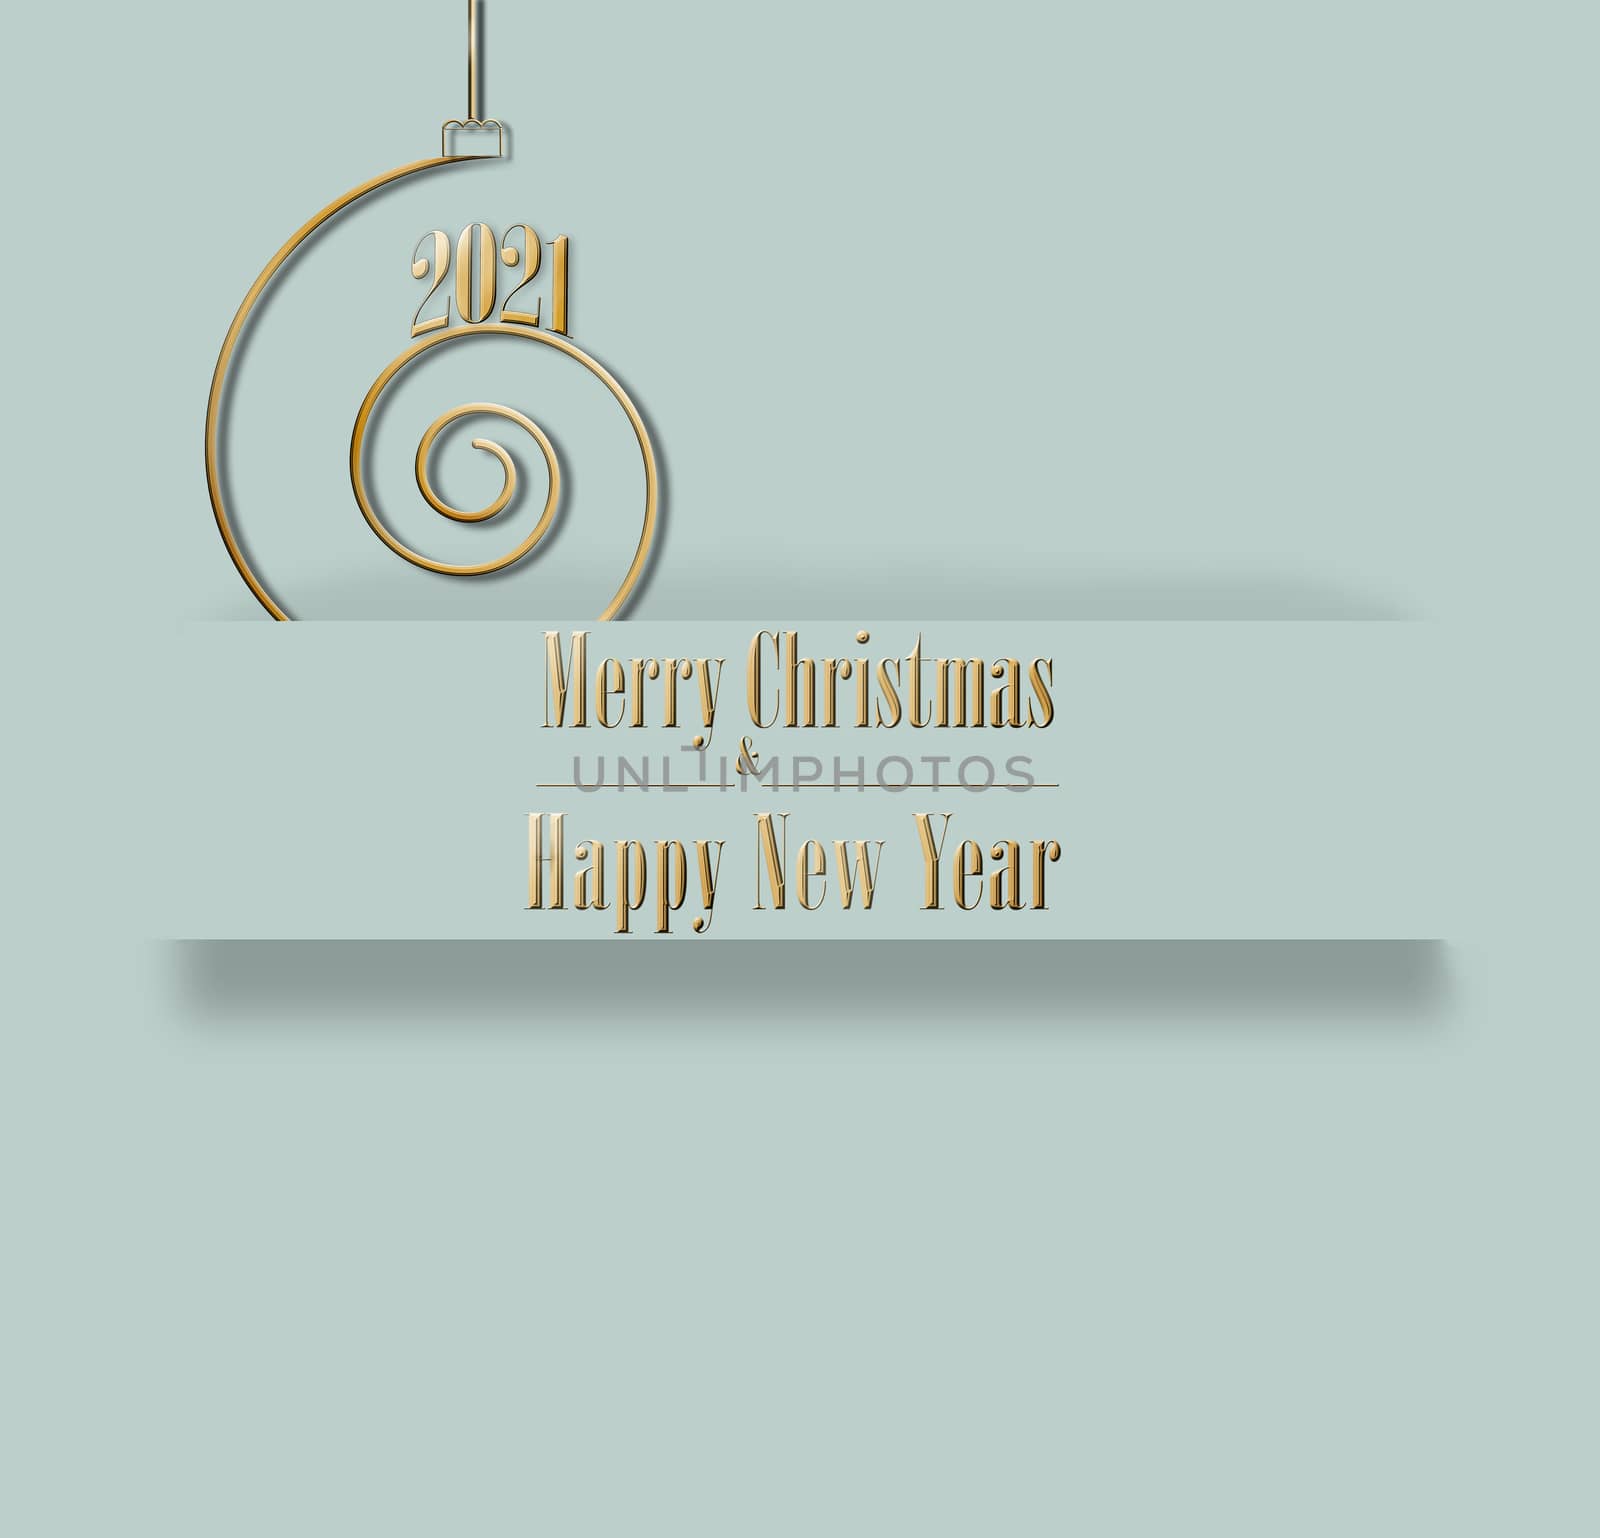 Elegant luxury minimalist 2021 Merry Christmas and Happy New Year card in pastel green colour with golden text and golden spiral with 2021. 3D Illustration